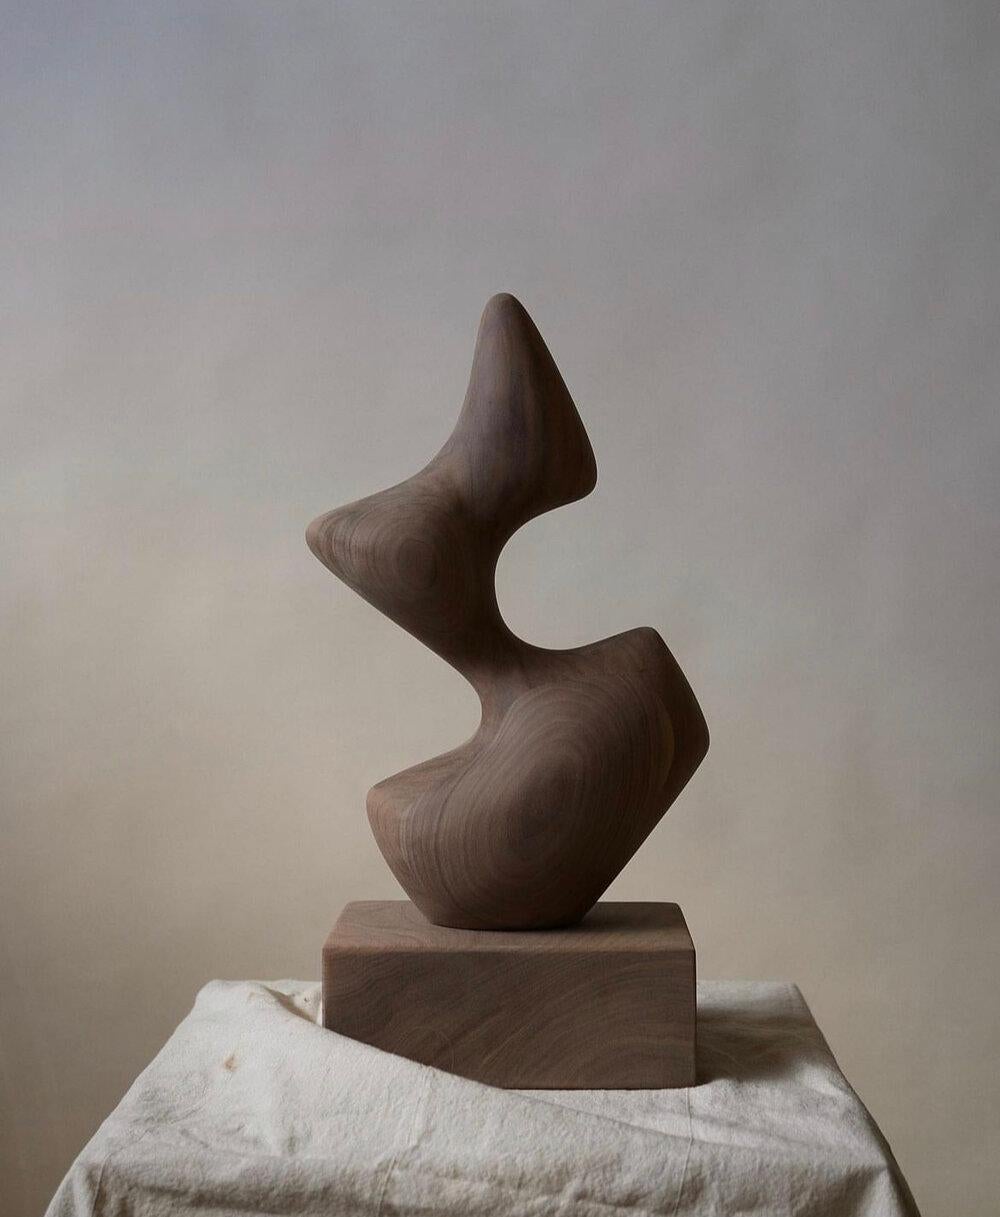 Topography Gen II Sculpture by Chandler McLellan
Limited Edition Of 15 Pieces.
Dimensions: D 12.1 x W 24.1 x H 43.2 cm. 
Materials: Walnut.

Finished with a soft matte water-based lacquer to preserve the natural color of the wood. Sculptures will be